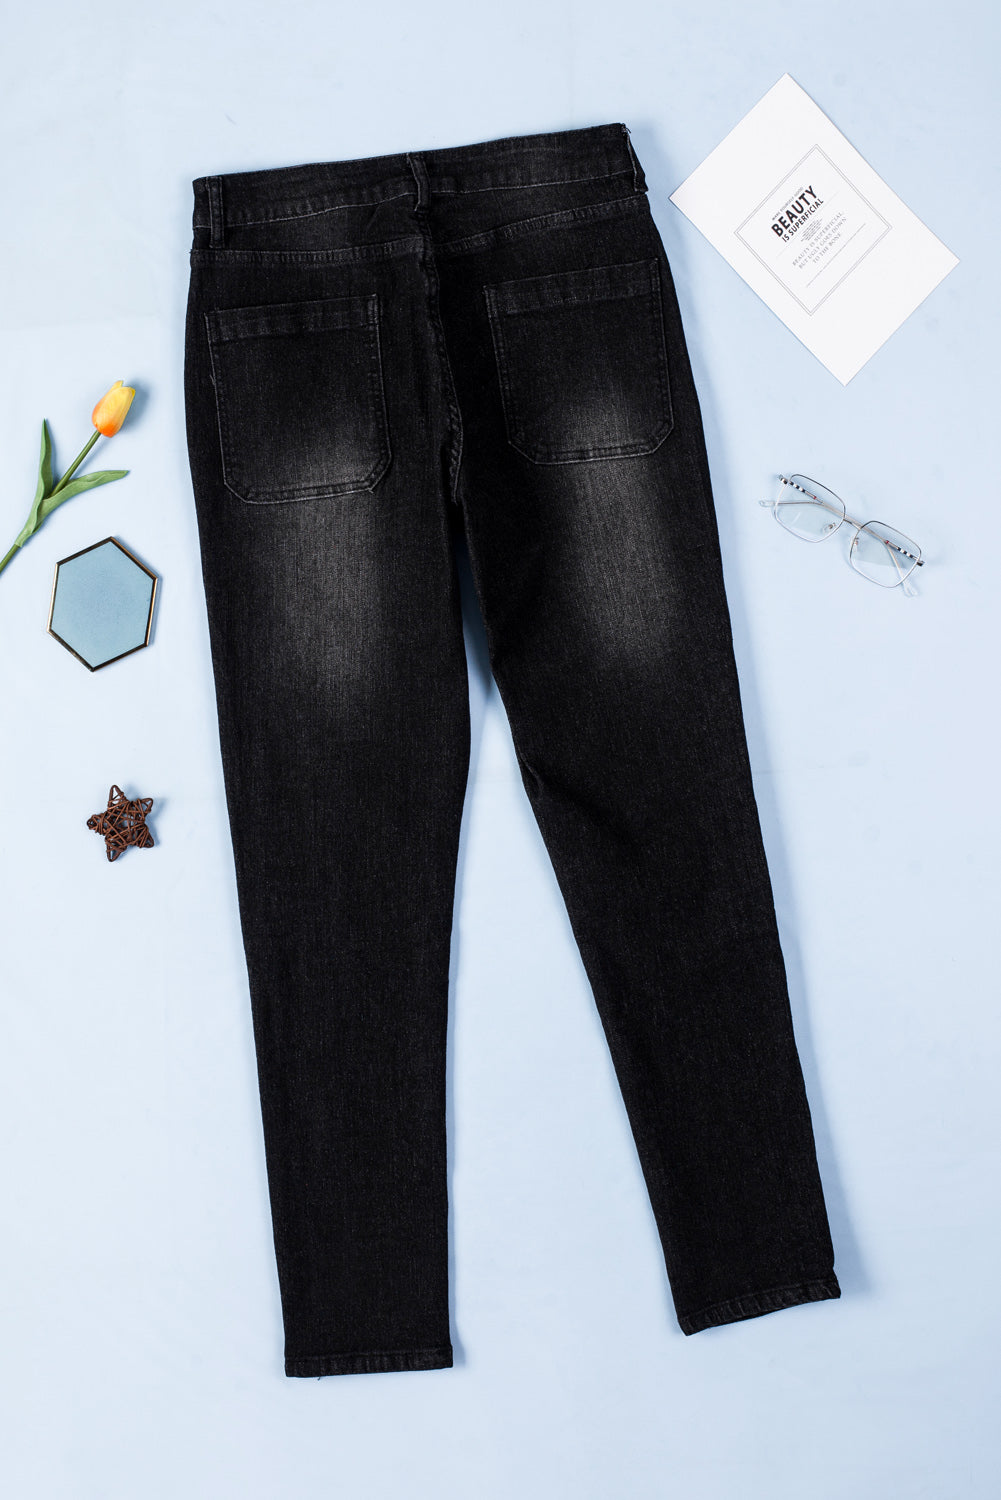 Black Button Fly Skinny Jeans with Pockets Jeans JT's Designer Fashion